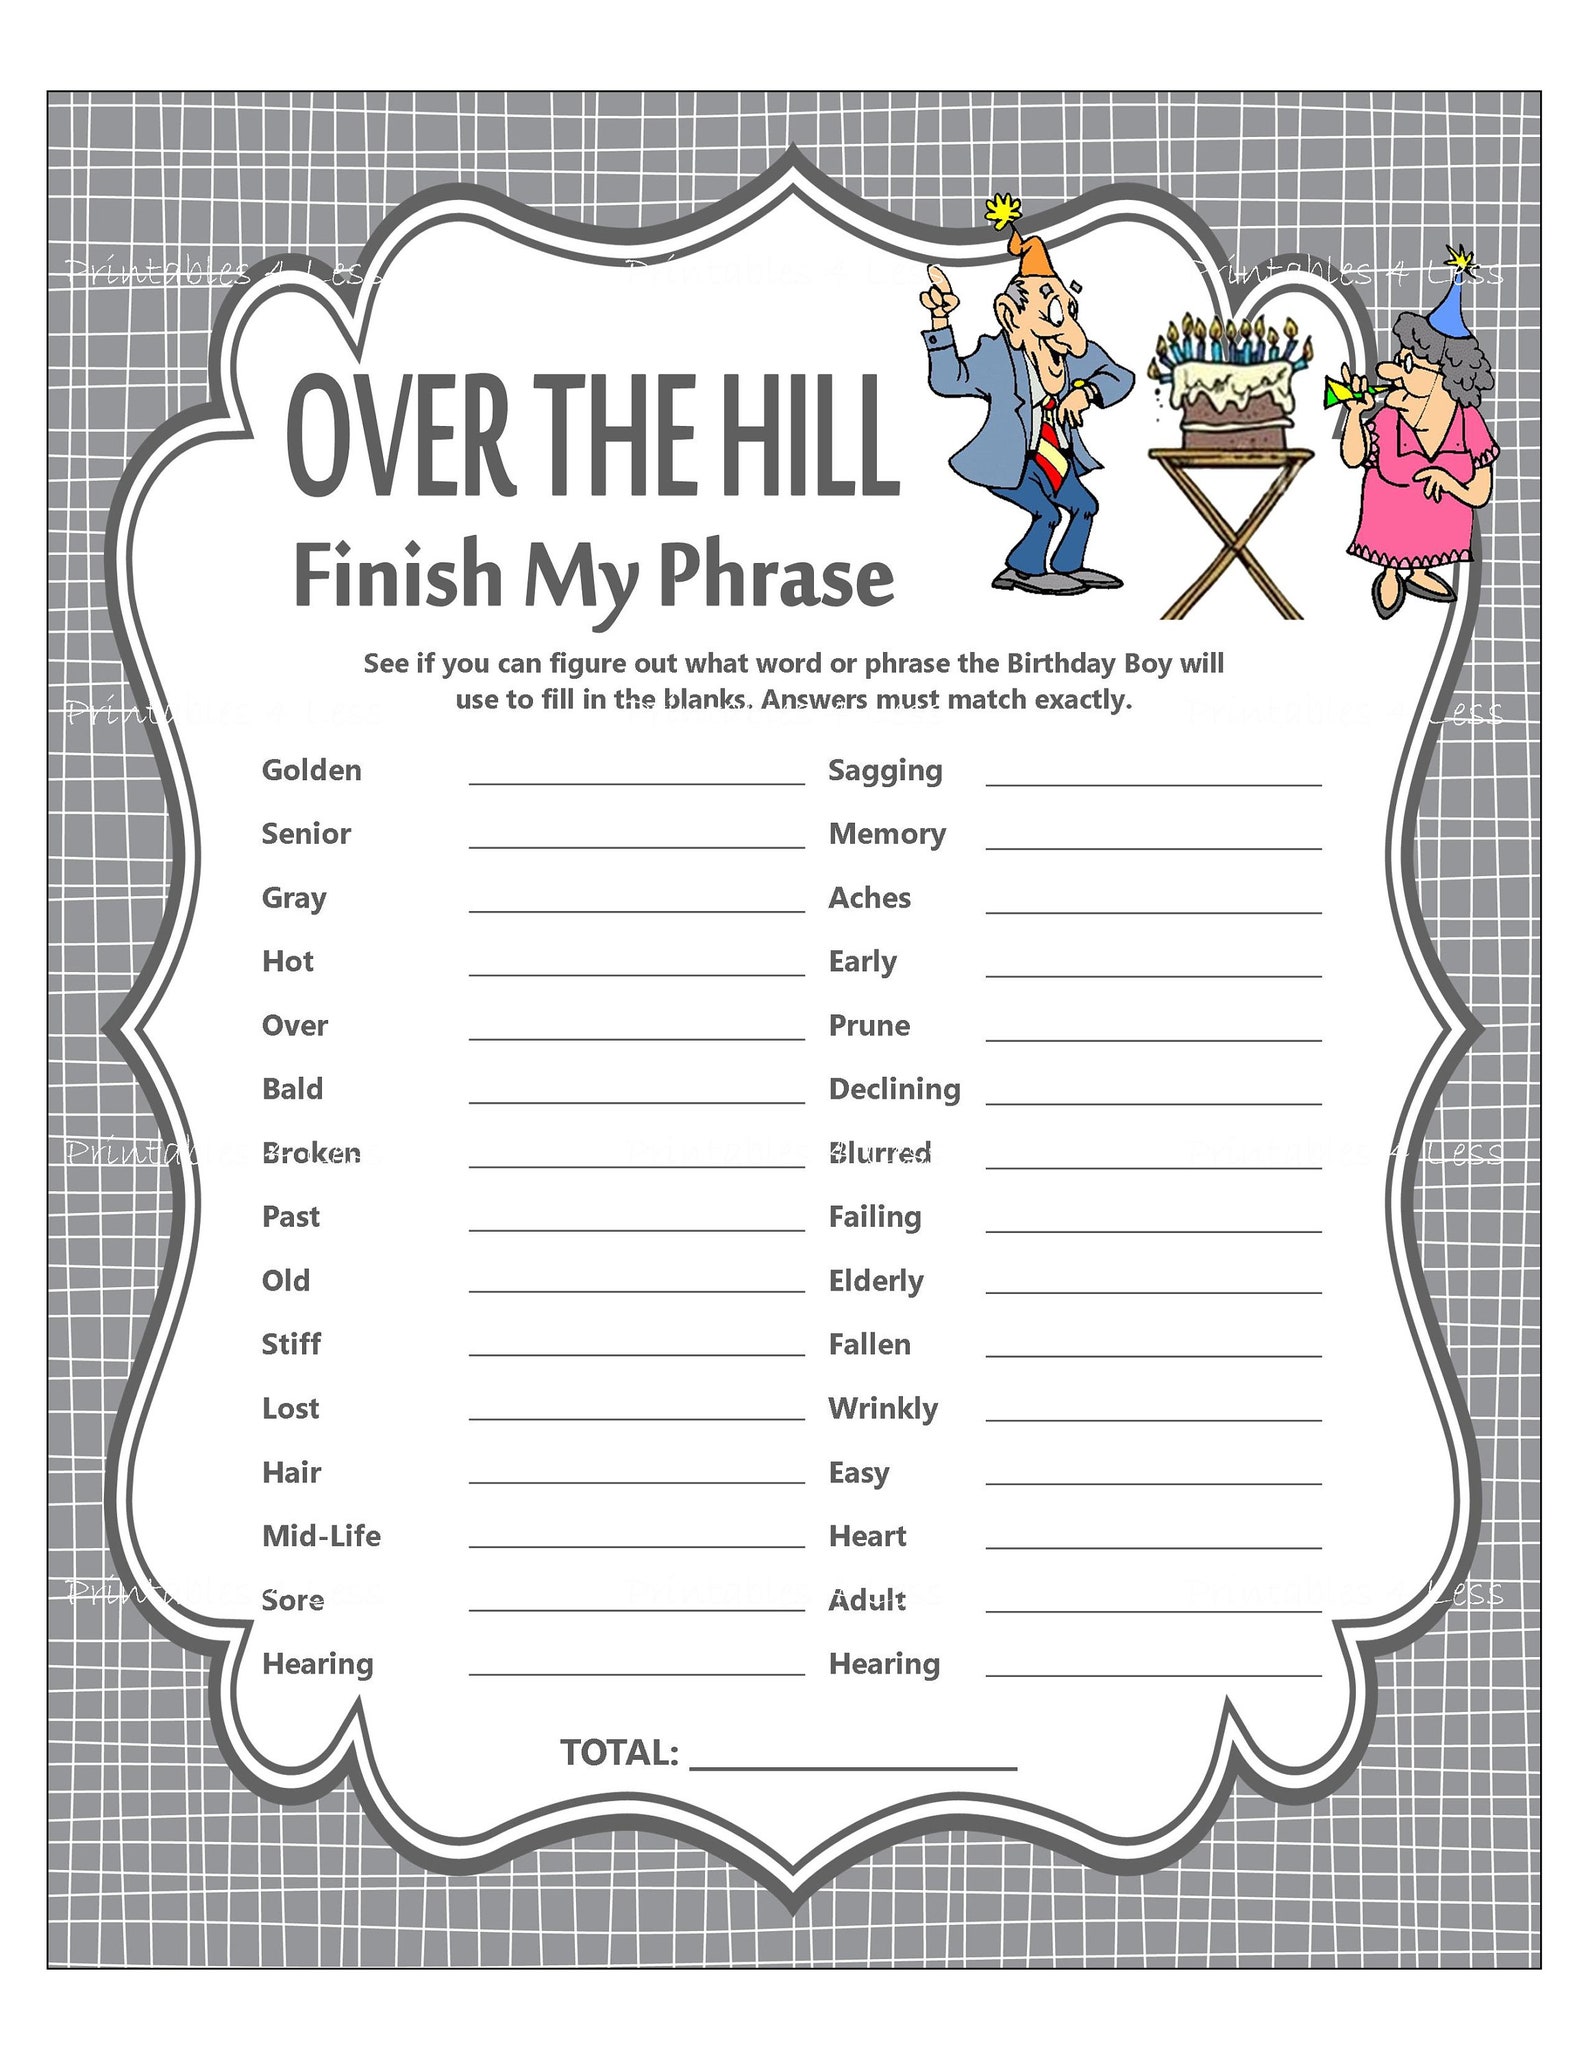 over-the-hill-finish-my-phrase-printable-over-the-hill-party-etsy